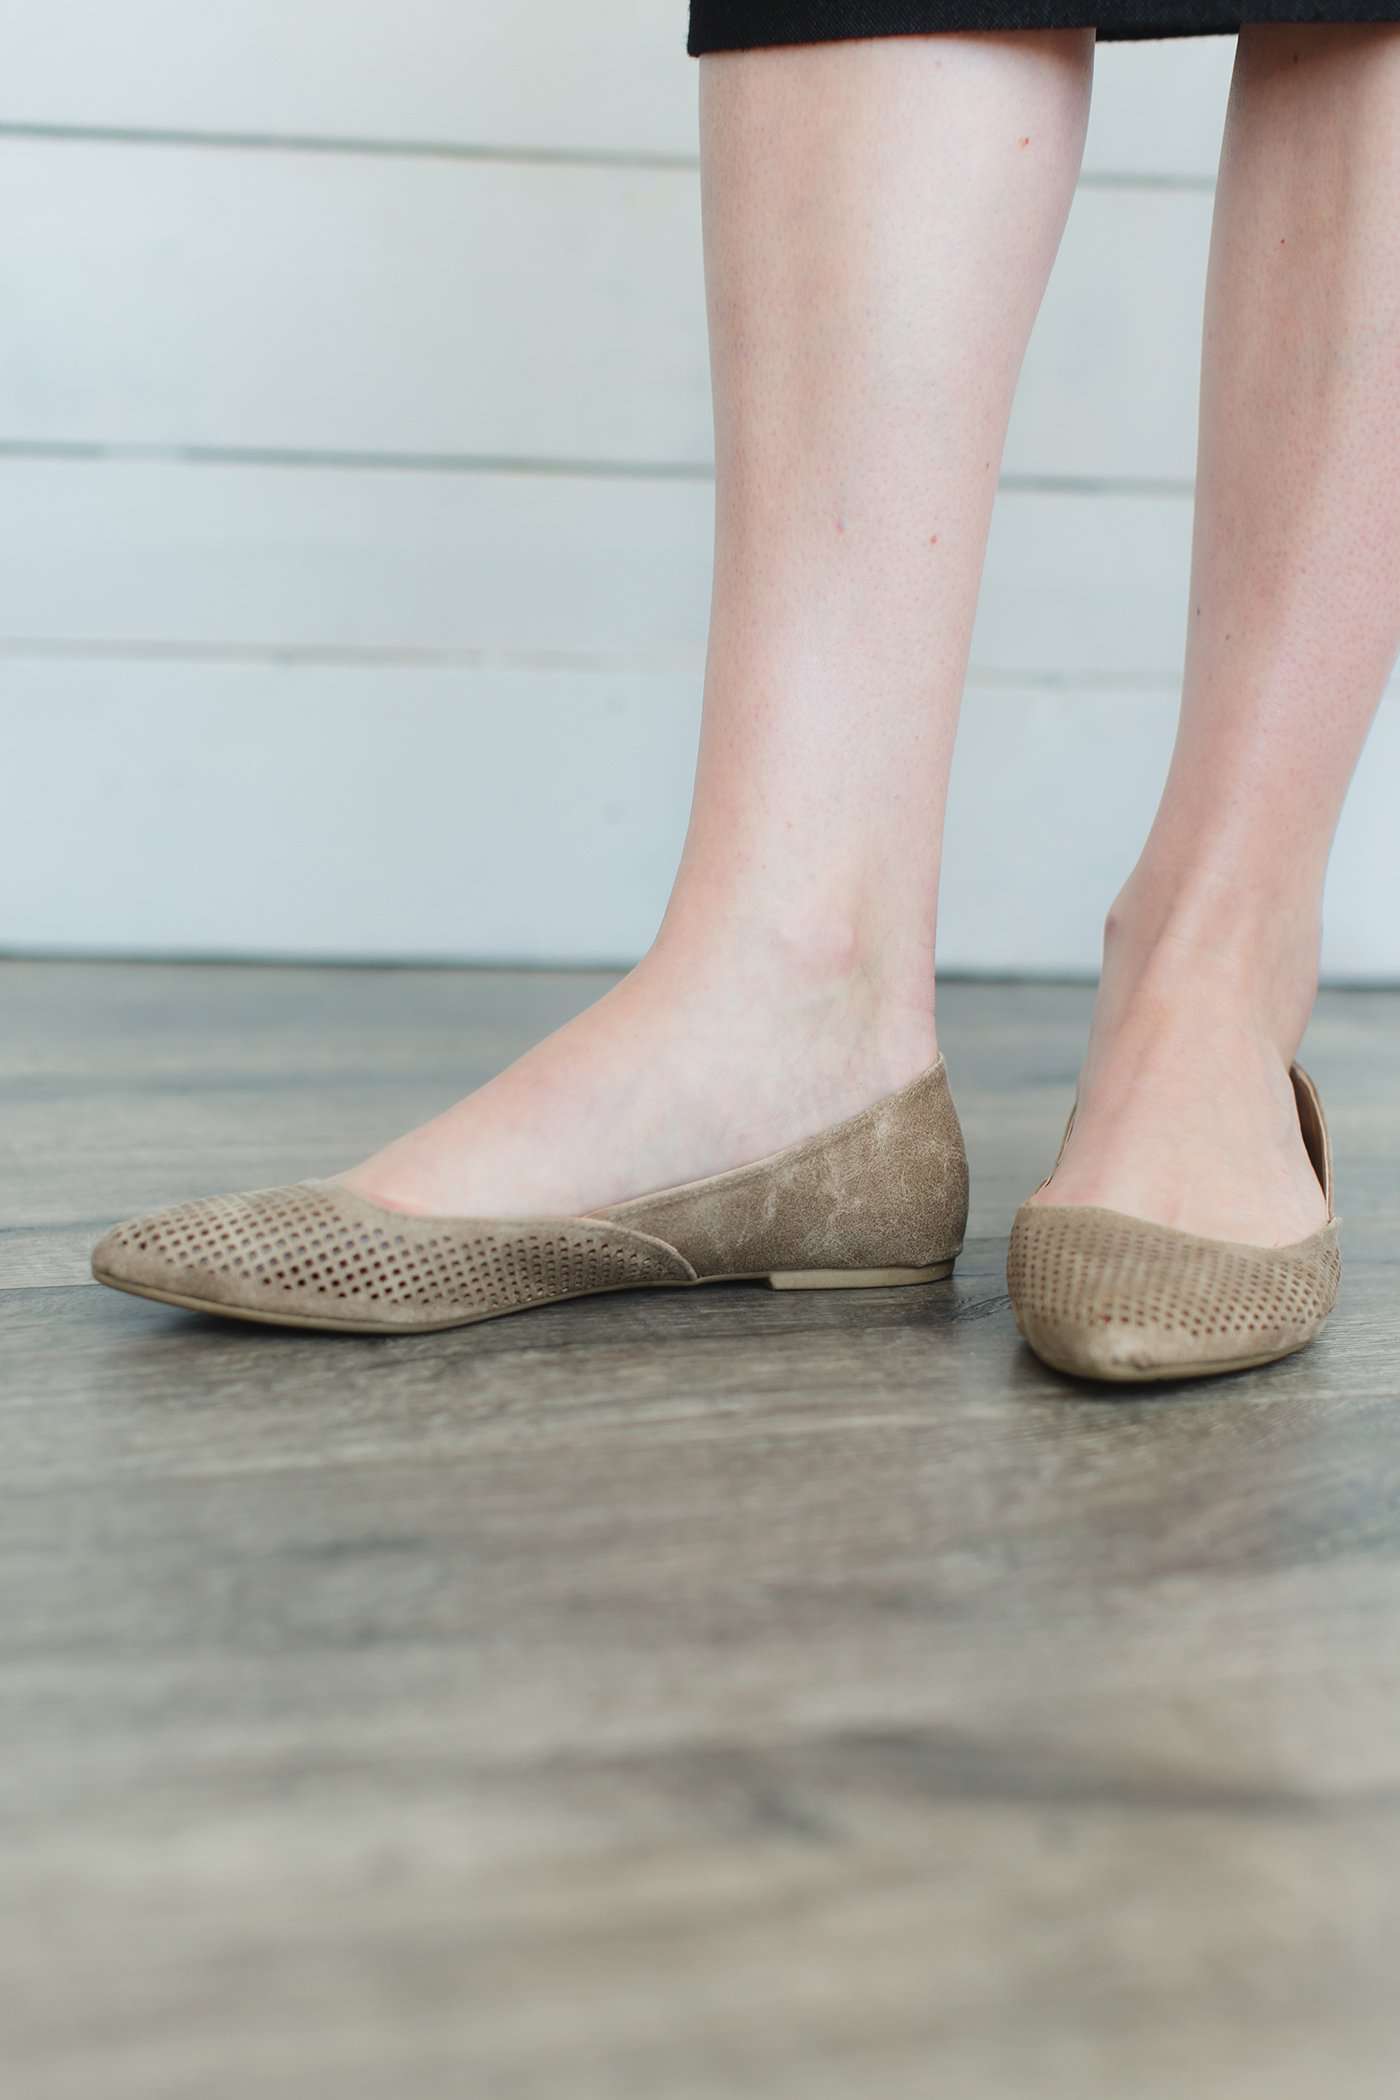 Blush or taupe casually detailed and patterned flat shoe with pointed toe.